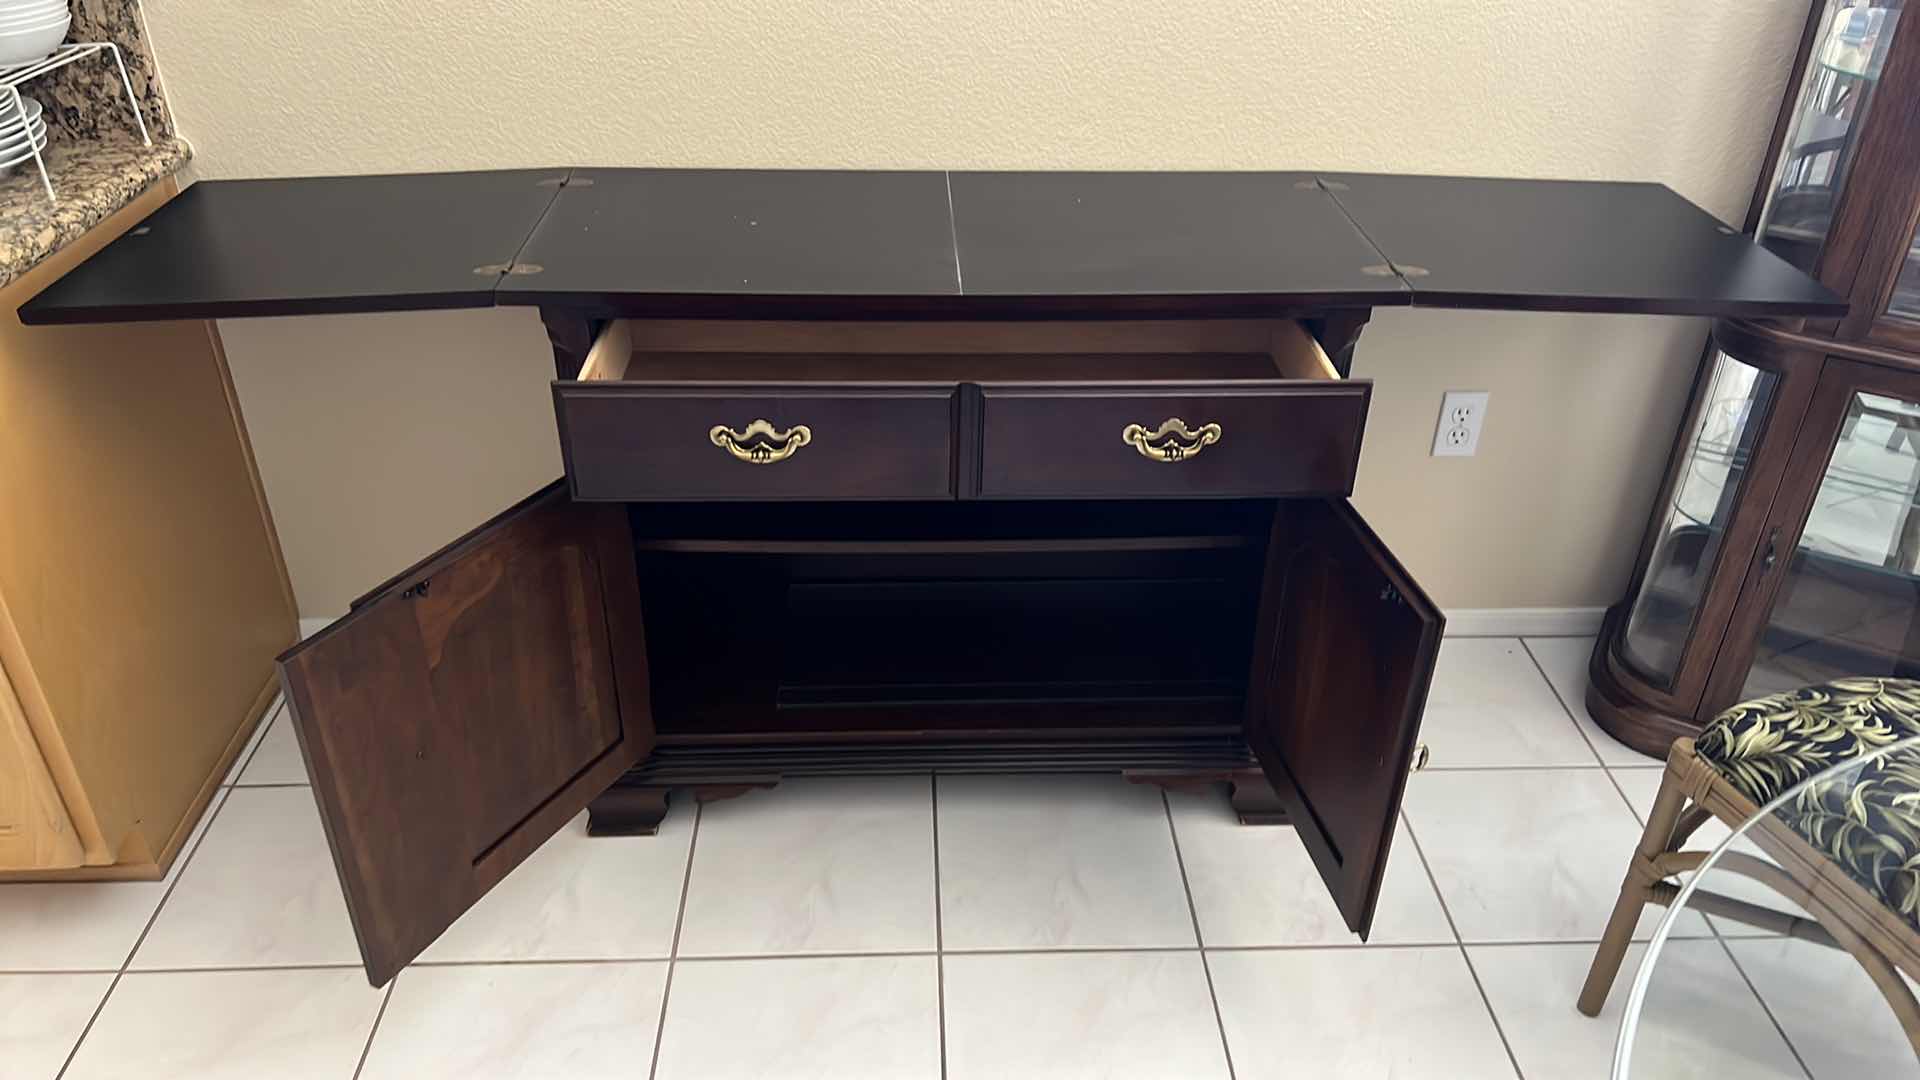 Photo 6 of THOMASVILLE MAHOGANY FOLD-OUT BUFFET W GOLD HARDWARE (FOLDED W40” UNFOLDED W80” x D18” H33”)